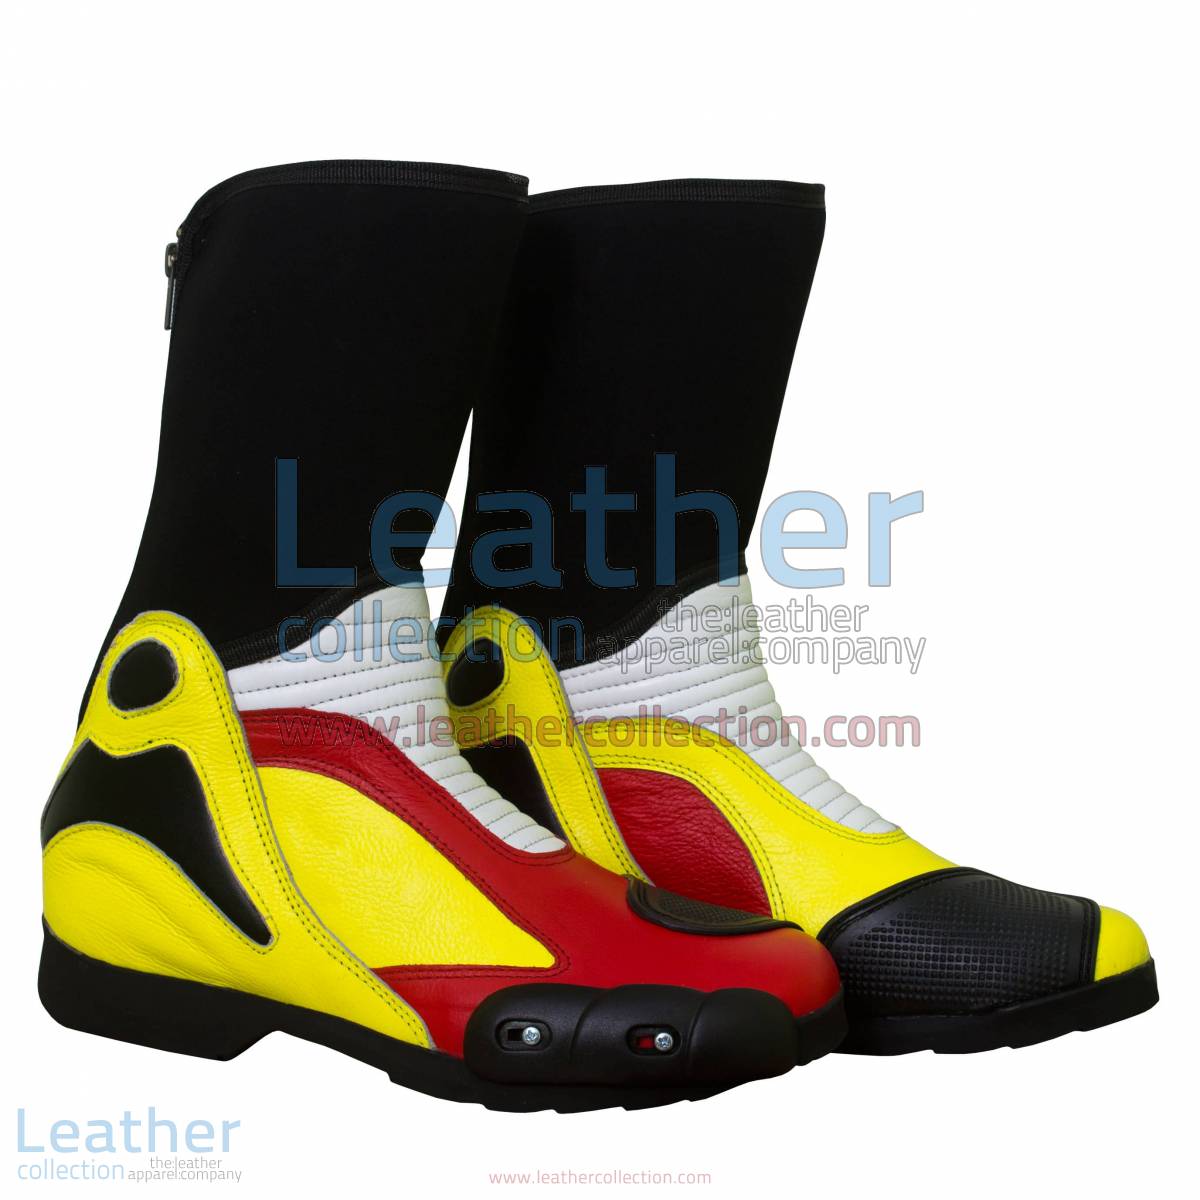 Andrea Iannone Motorbike Race Boots | motorcycle boots